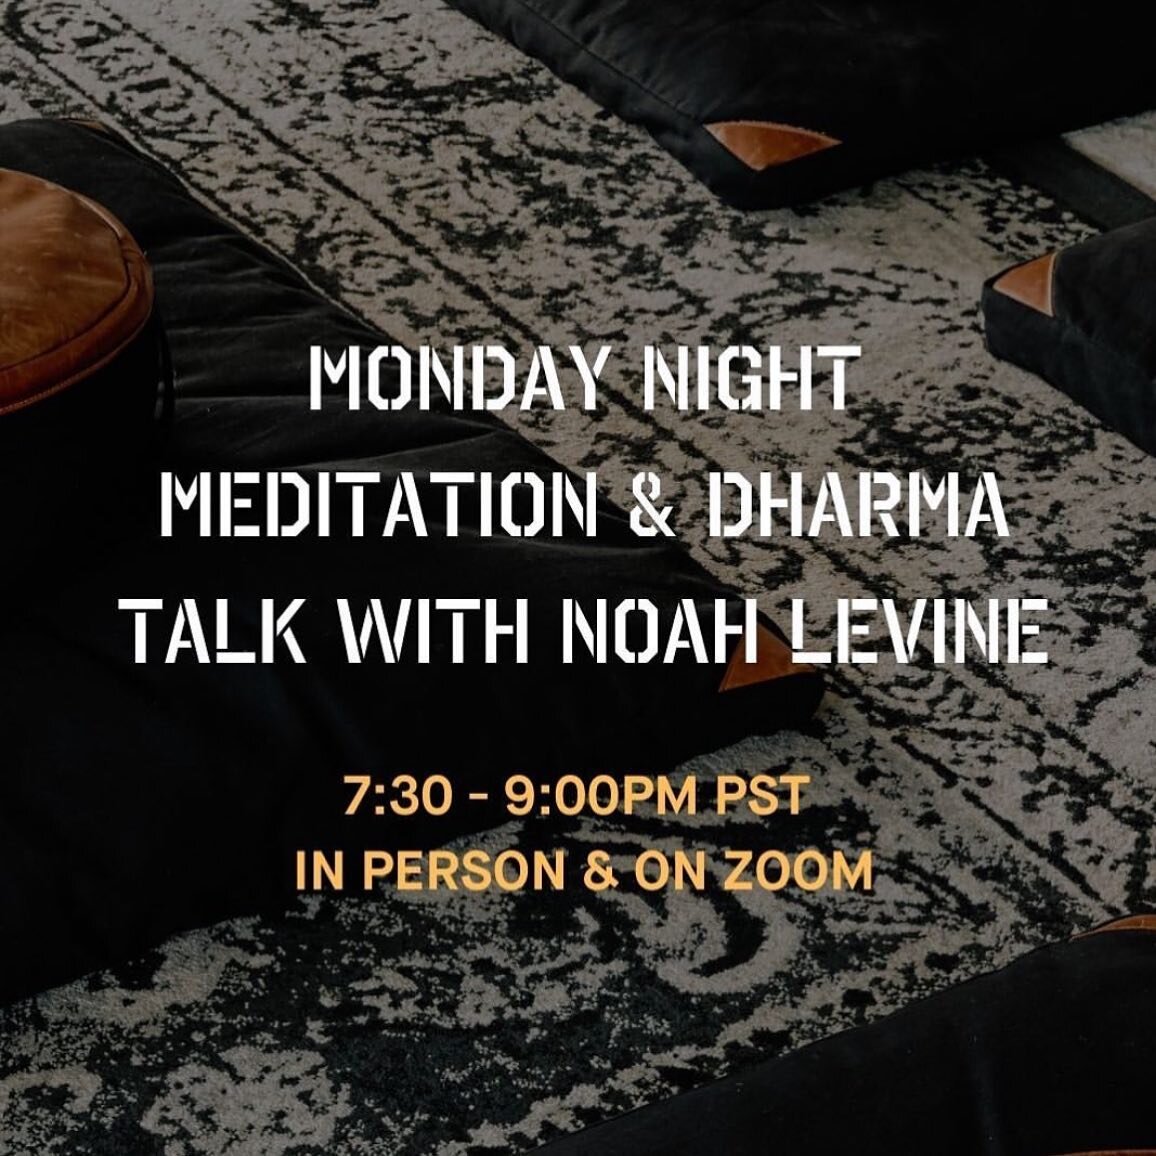 Join @noahlevine108 and the sangha tonight for the weekly Monday night meditation &amp; dharma talk.

7:30pm -9:00pm PST 
Attend in person at Against the Stream or online via zoom with the link in our bio.

.
.
.
.
.
#AgainstTheStream&nbsp;#DharmaPun